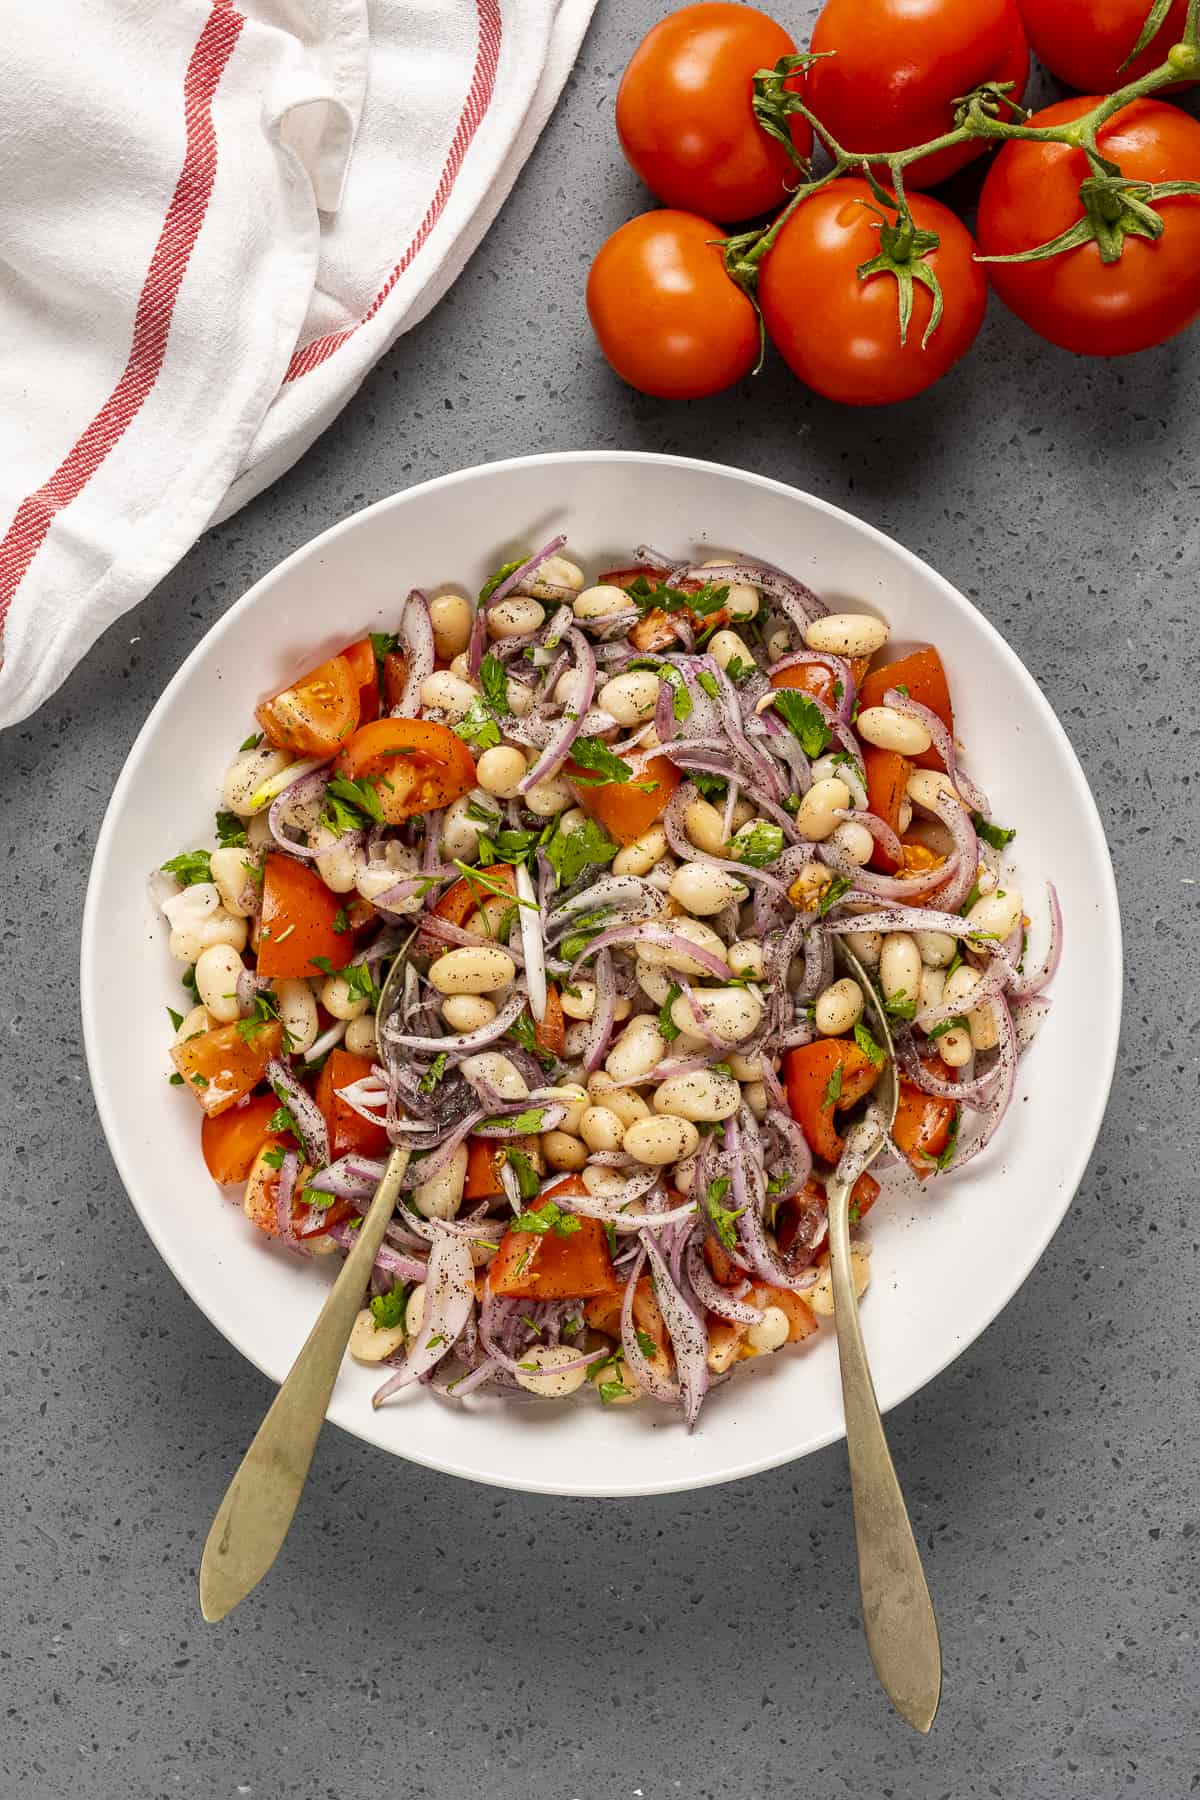 Bean salad with tomatoes and onions in a white bowl and two spoons in it.